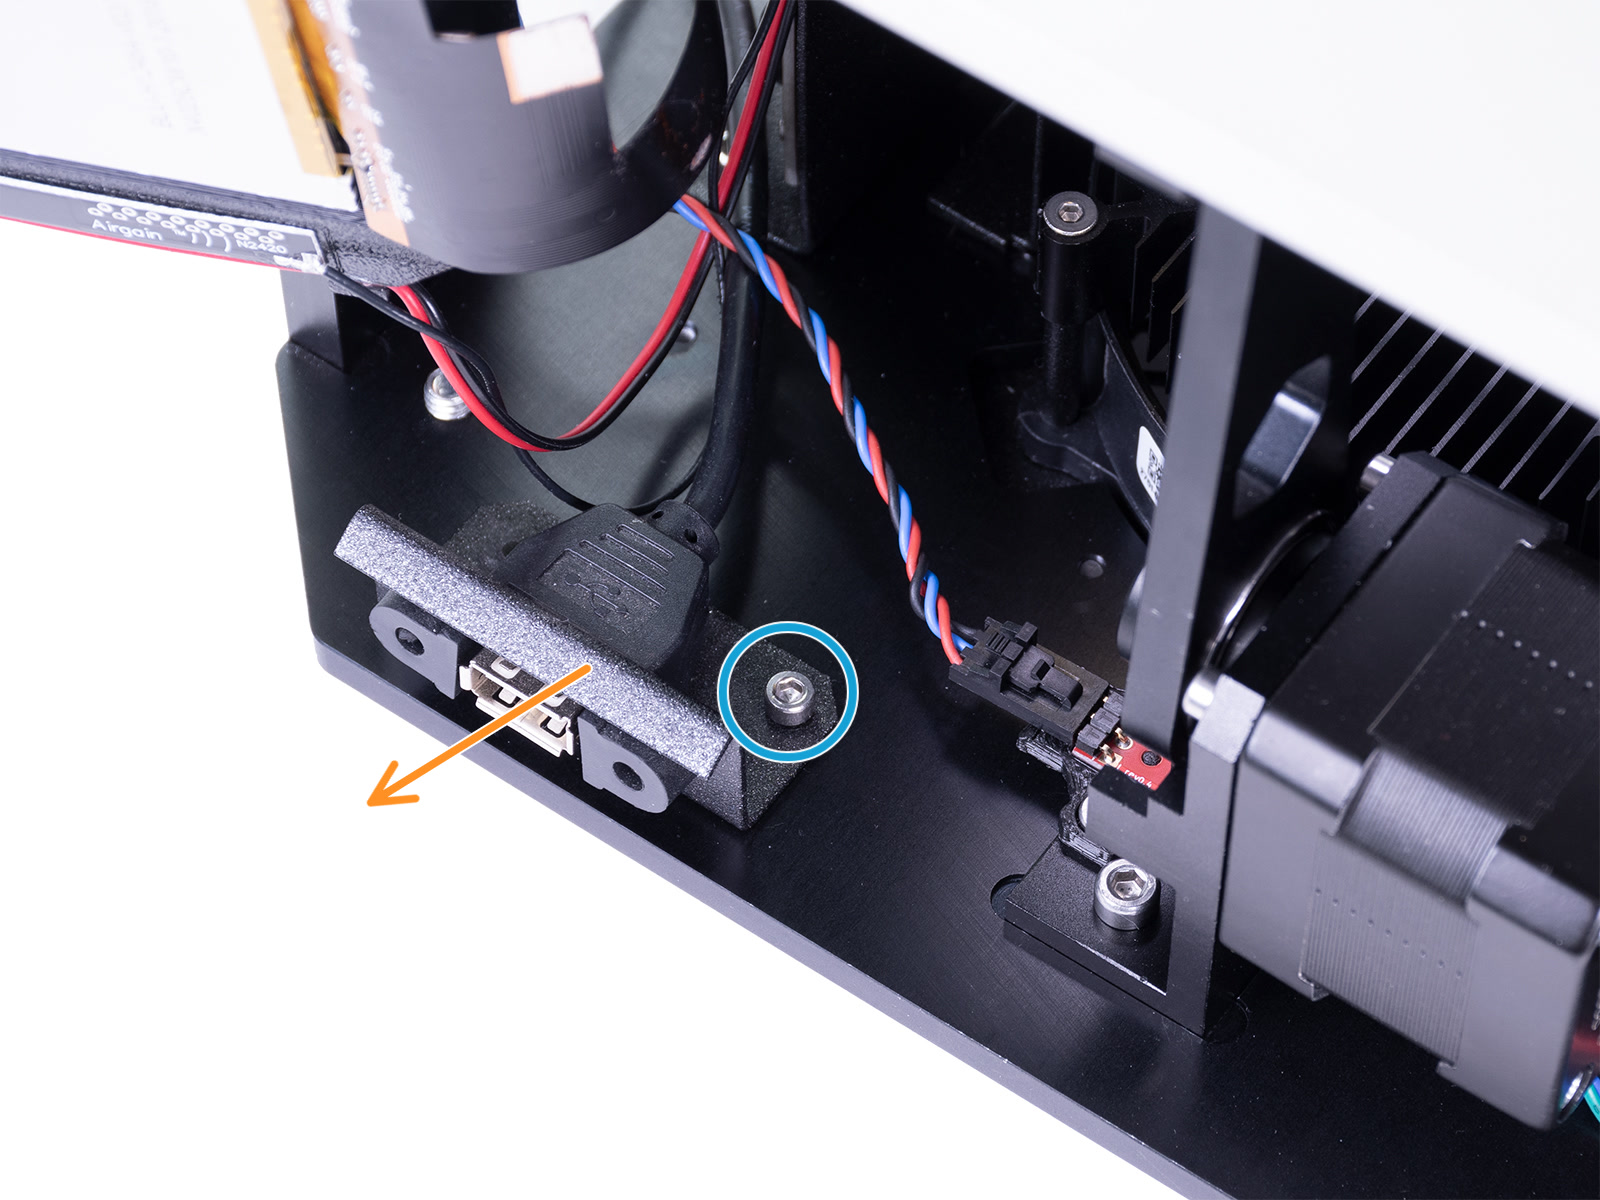 Removing the USB connector (Version 1.0)